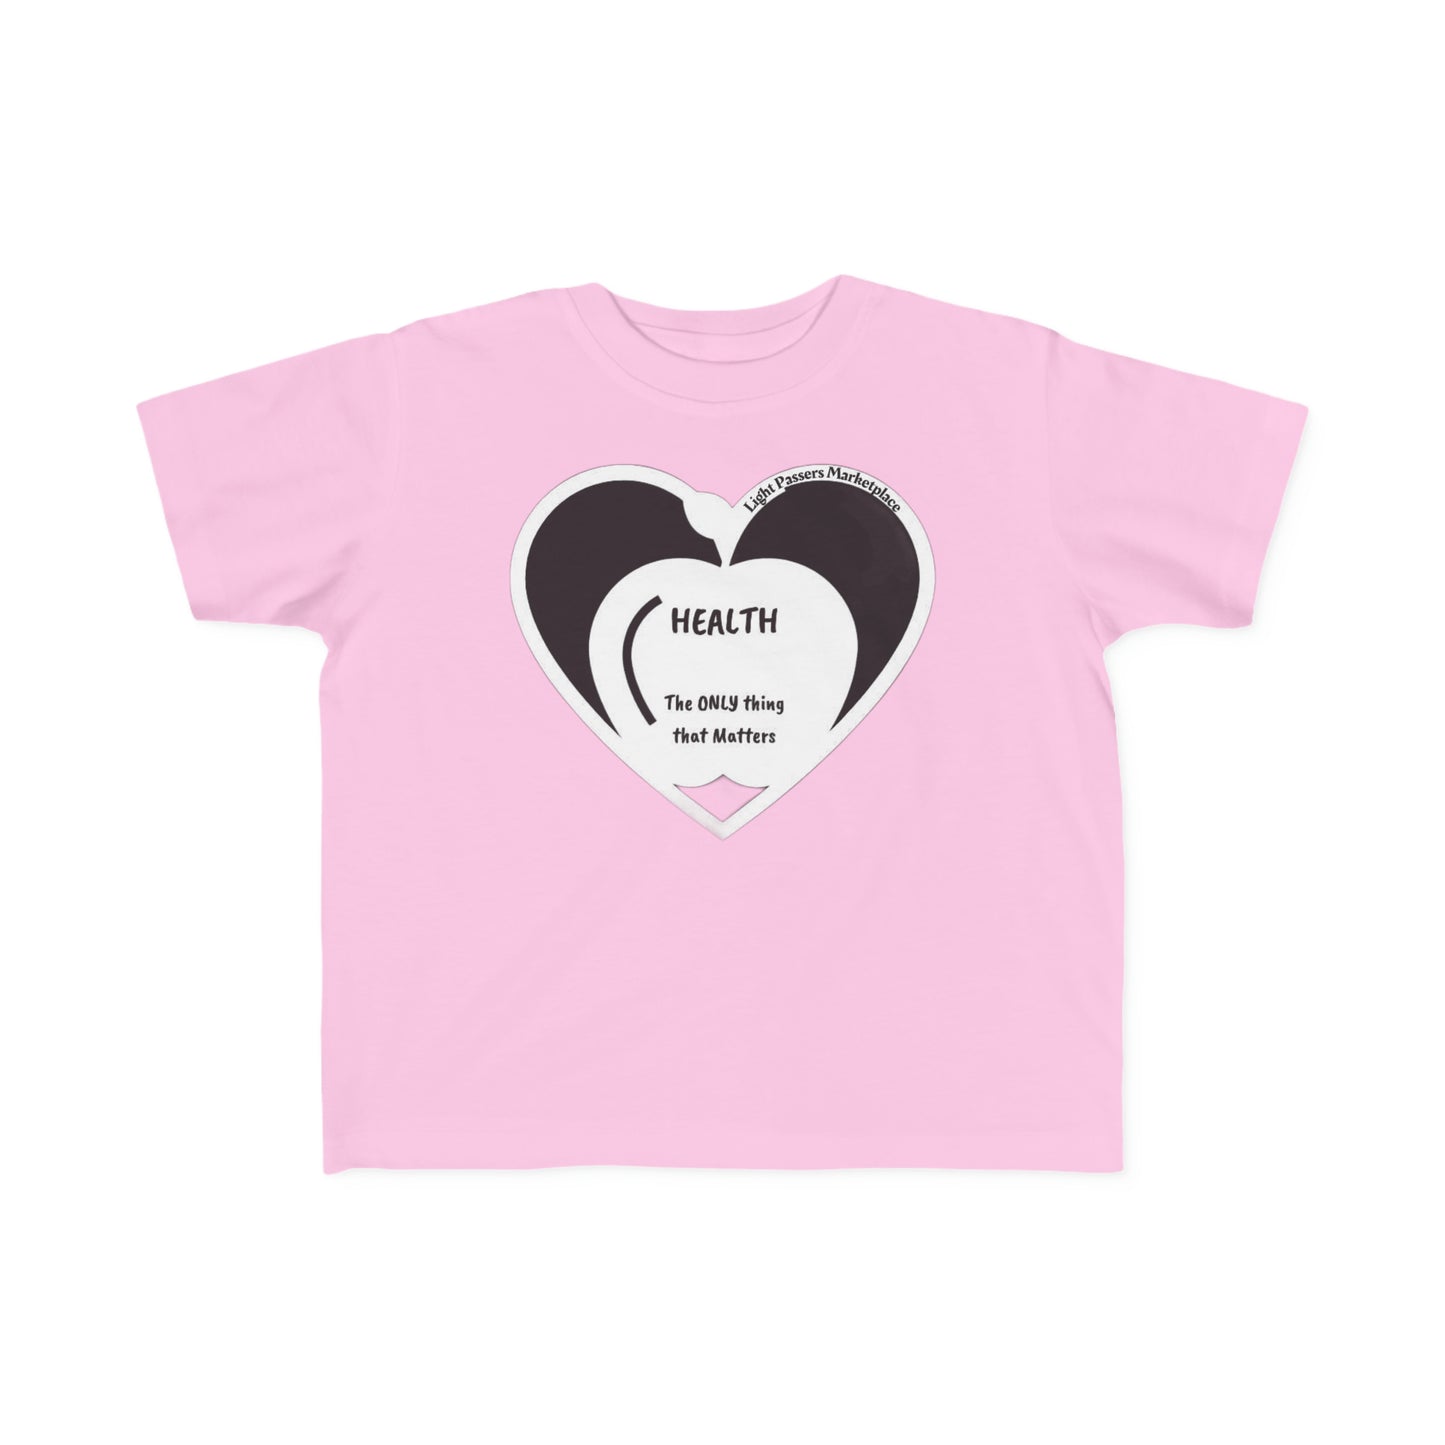 LIght Passers Marketplace Apple Health Toddler Jersey T-shirts Nutrition,  Simple Messages